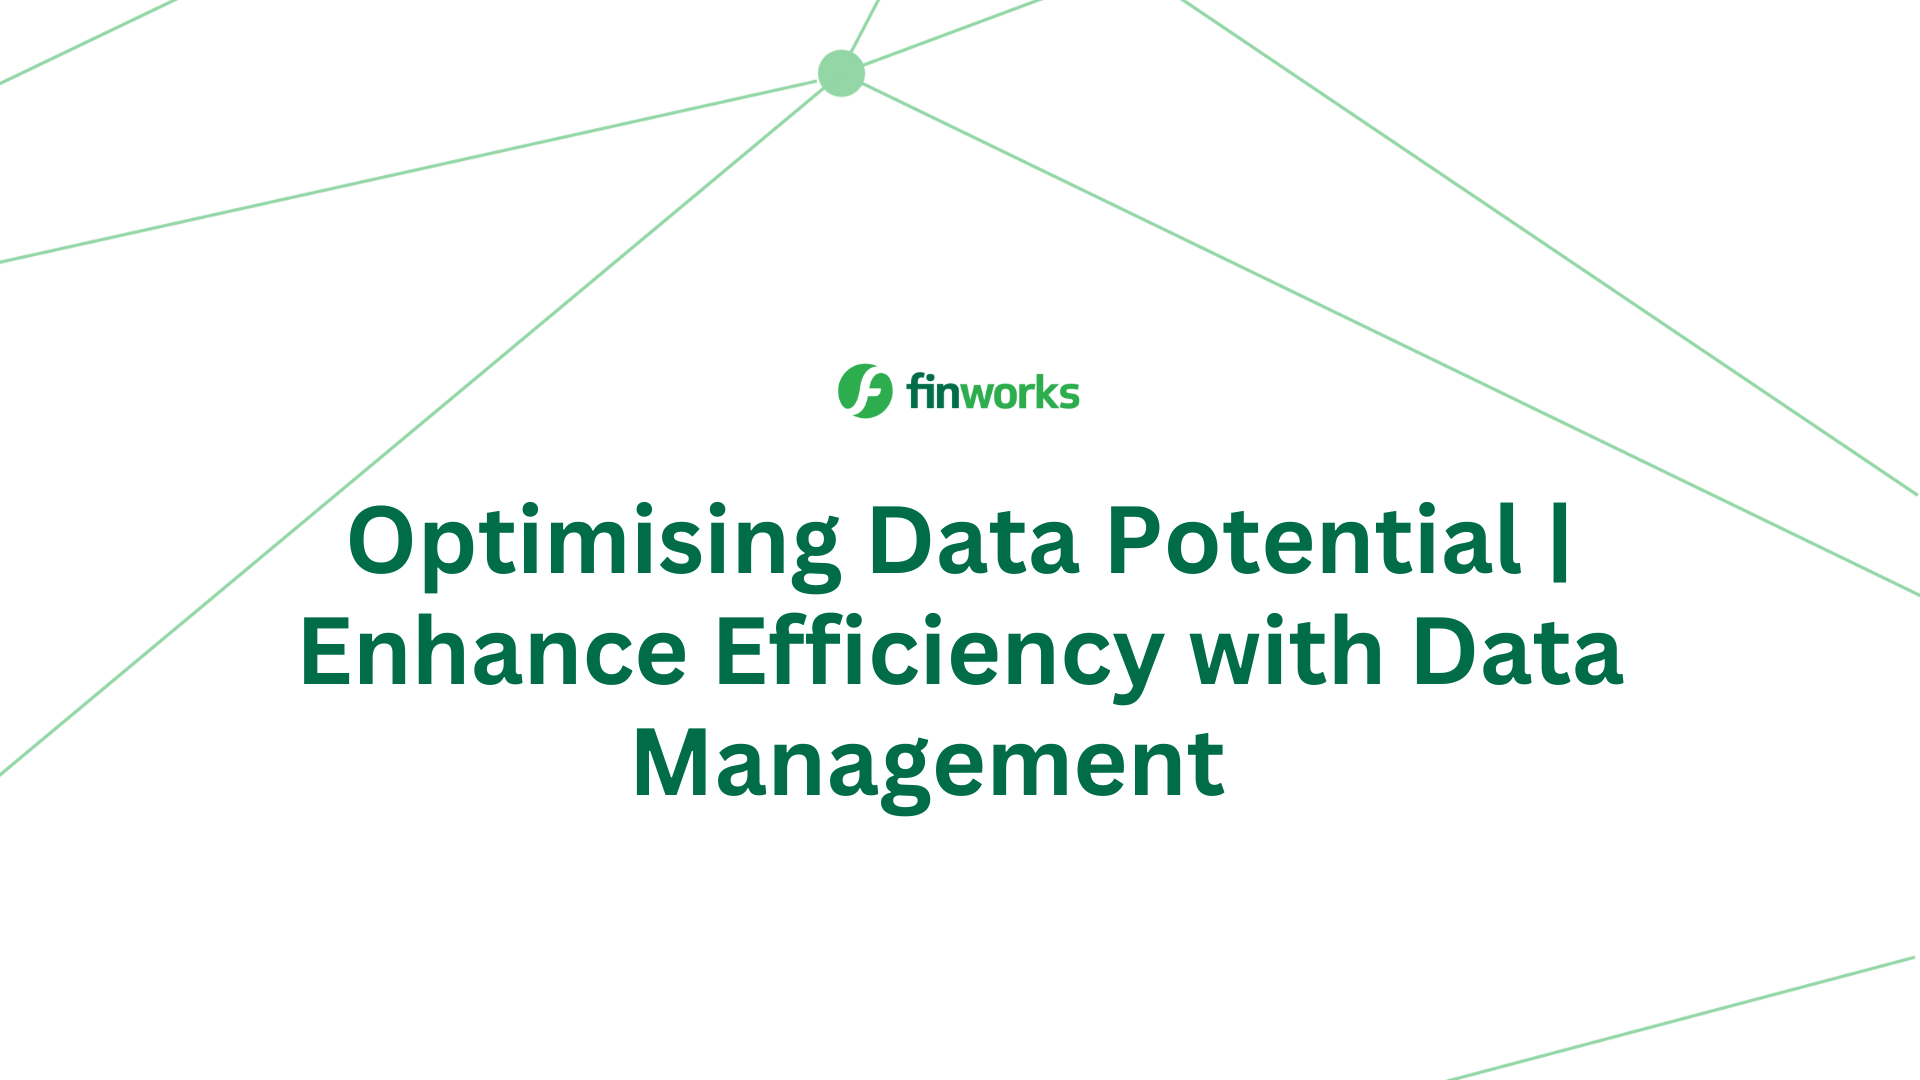 Optimising Data Potential | Enhance Efficiency with Data Management